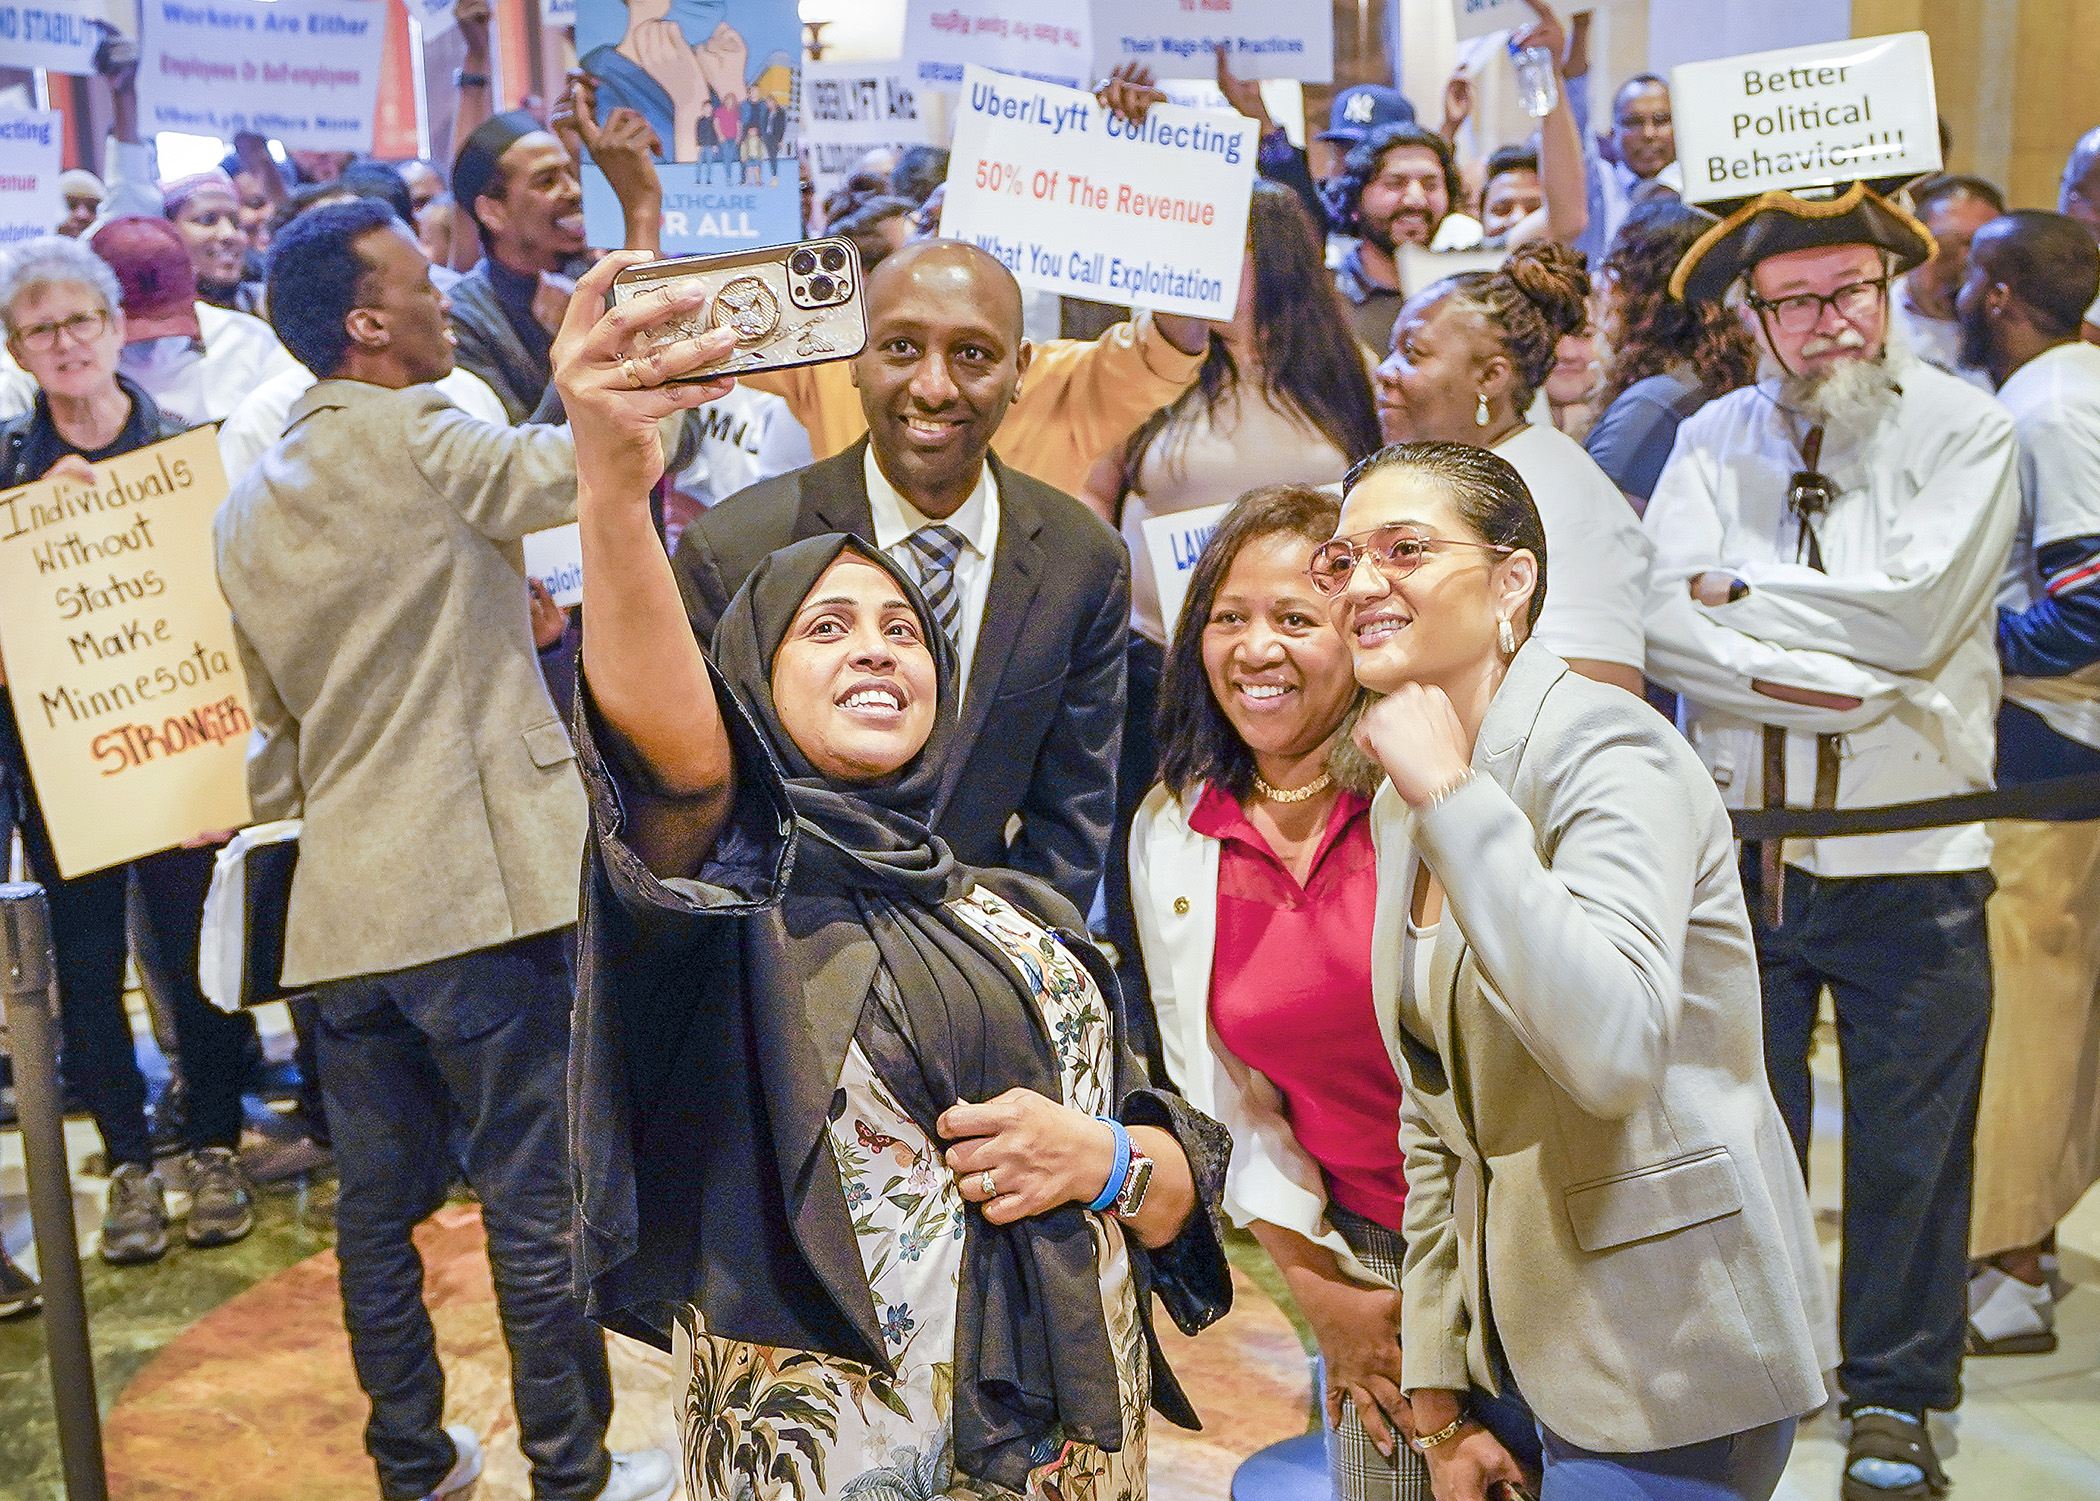 Rep. Hodan Hassan, Rep. Mohamud Noor, Rep. Mary Francis Clardy and Rep. Marìa Isa Pèrez-Vega pose for a selfie with supporters of HF2369 in front of the House Chamber May 17. (Photo by Andrew VonBank)